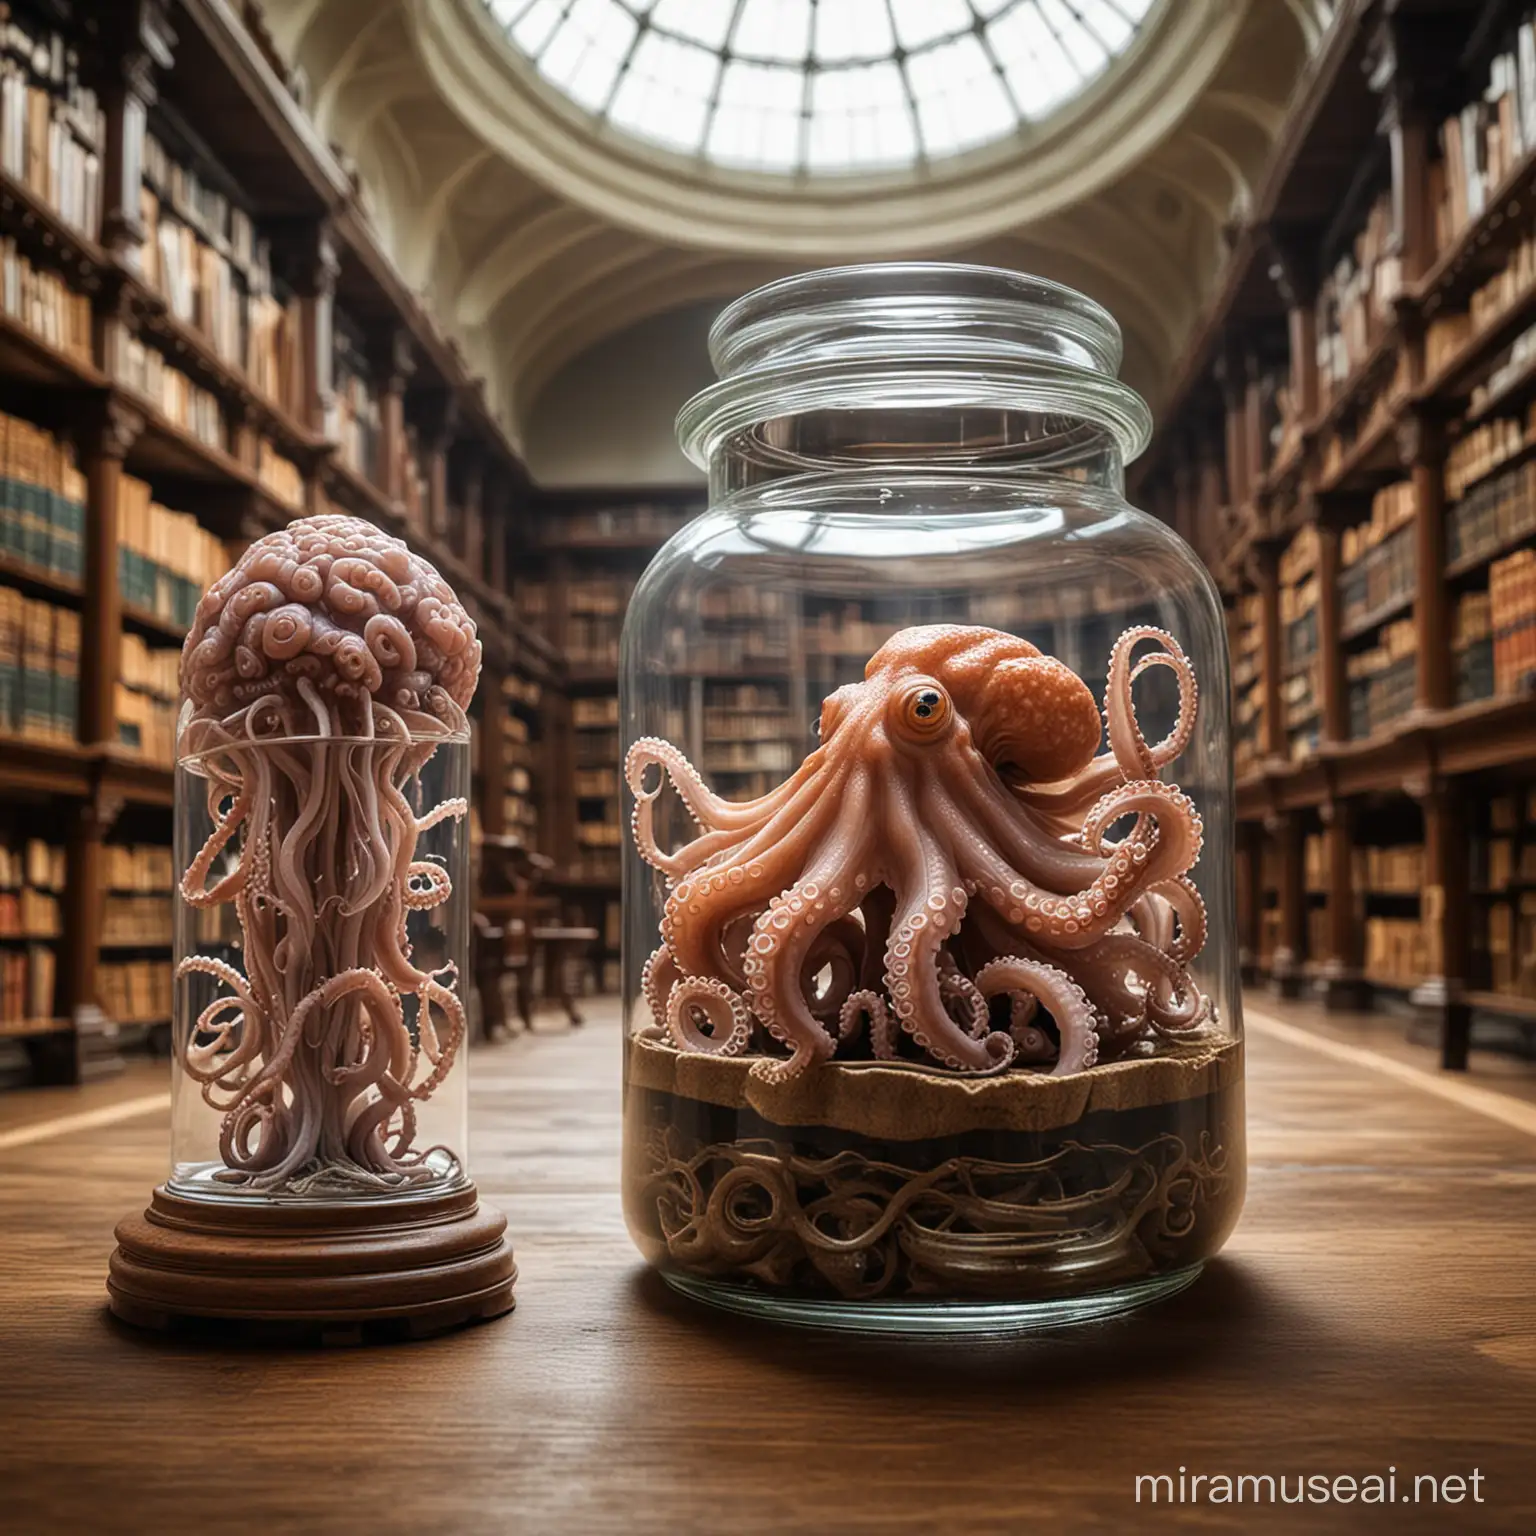 scholarly octopus in a grand library with a brain in a jar in the background